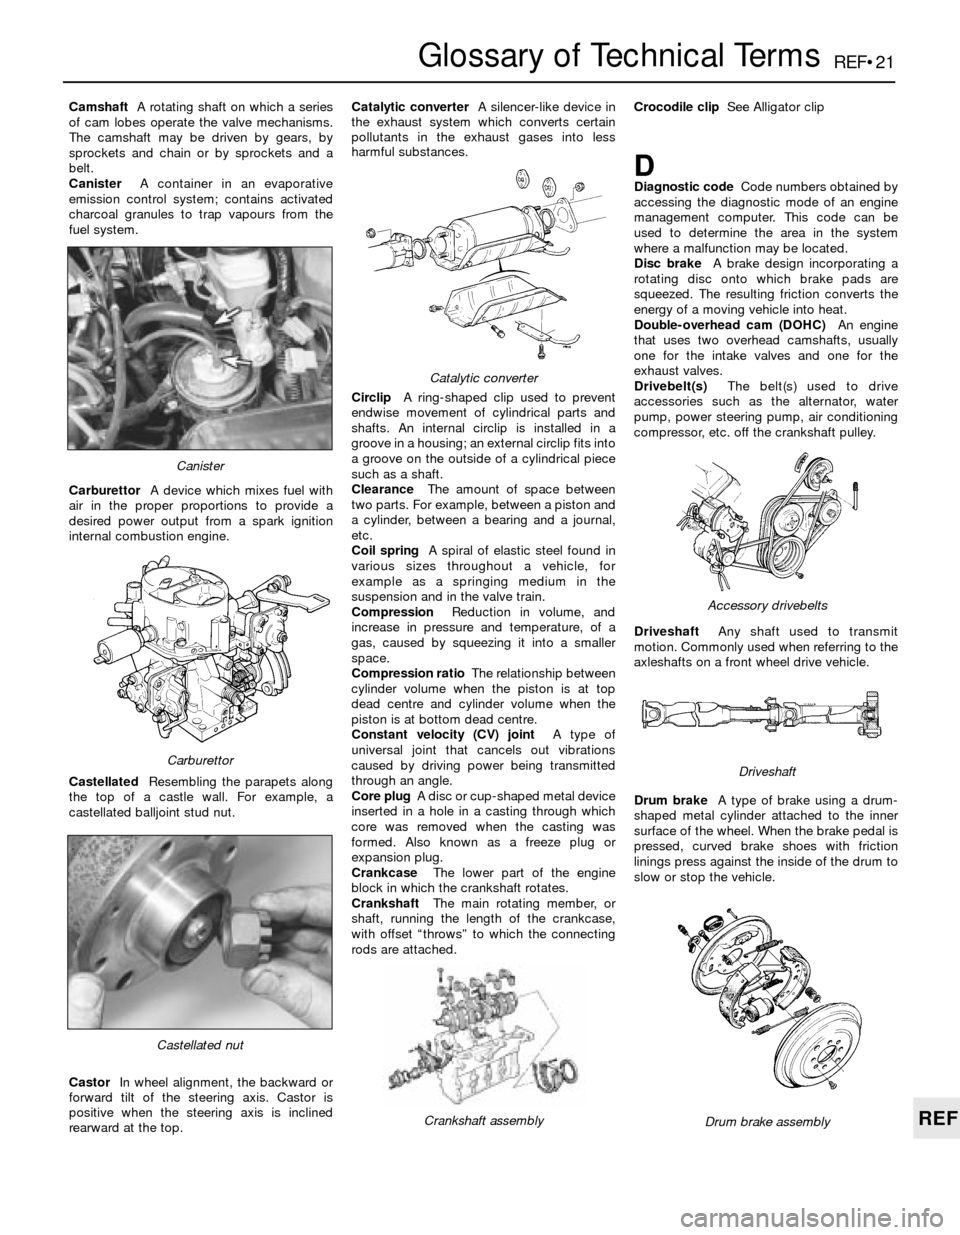 BMW 3 SERIES 1986 E30 Manual PDF REF•21
REF
Glossary of Technical Terms
CamshaftA rotating shaft on which a series
of cam lobes operate the valve mechanisms.
The camshaft may be driven by gears, by
sprockets and chain or by sprocke